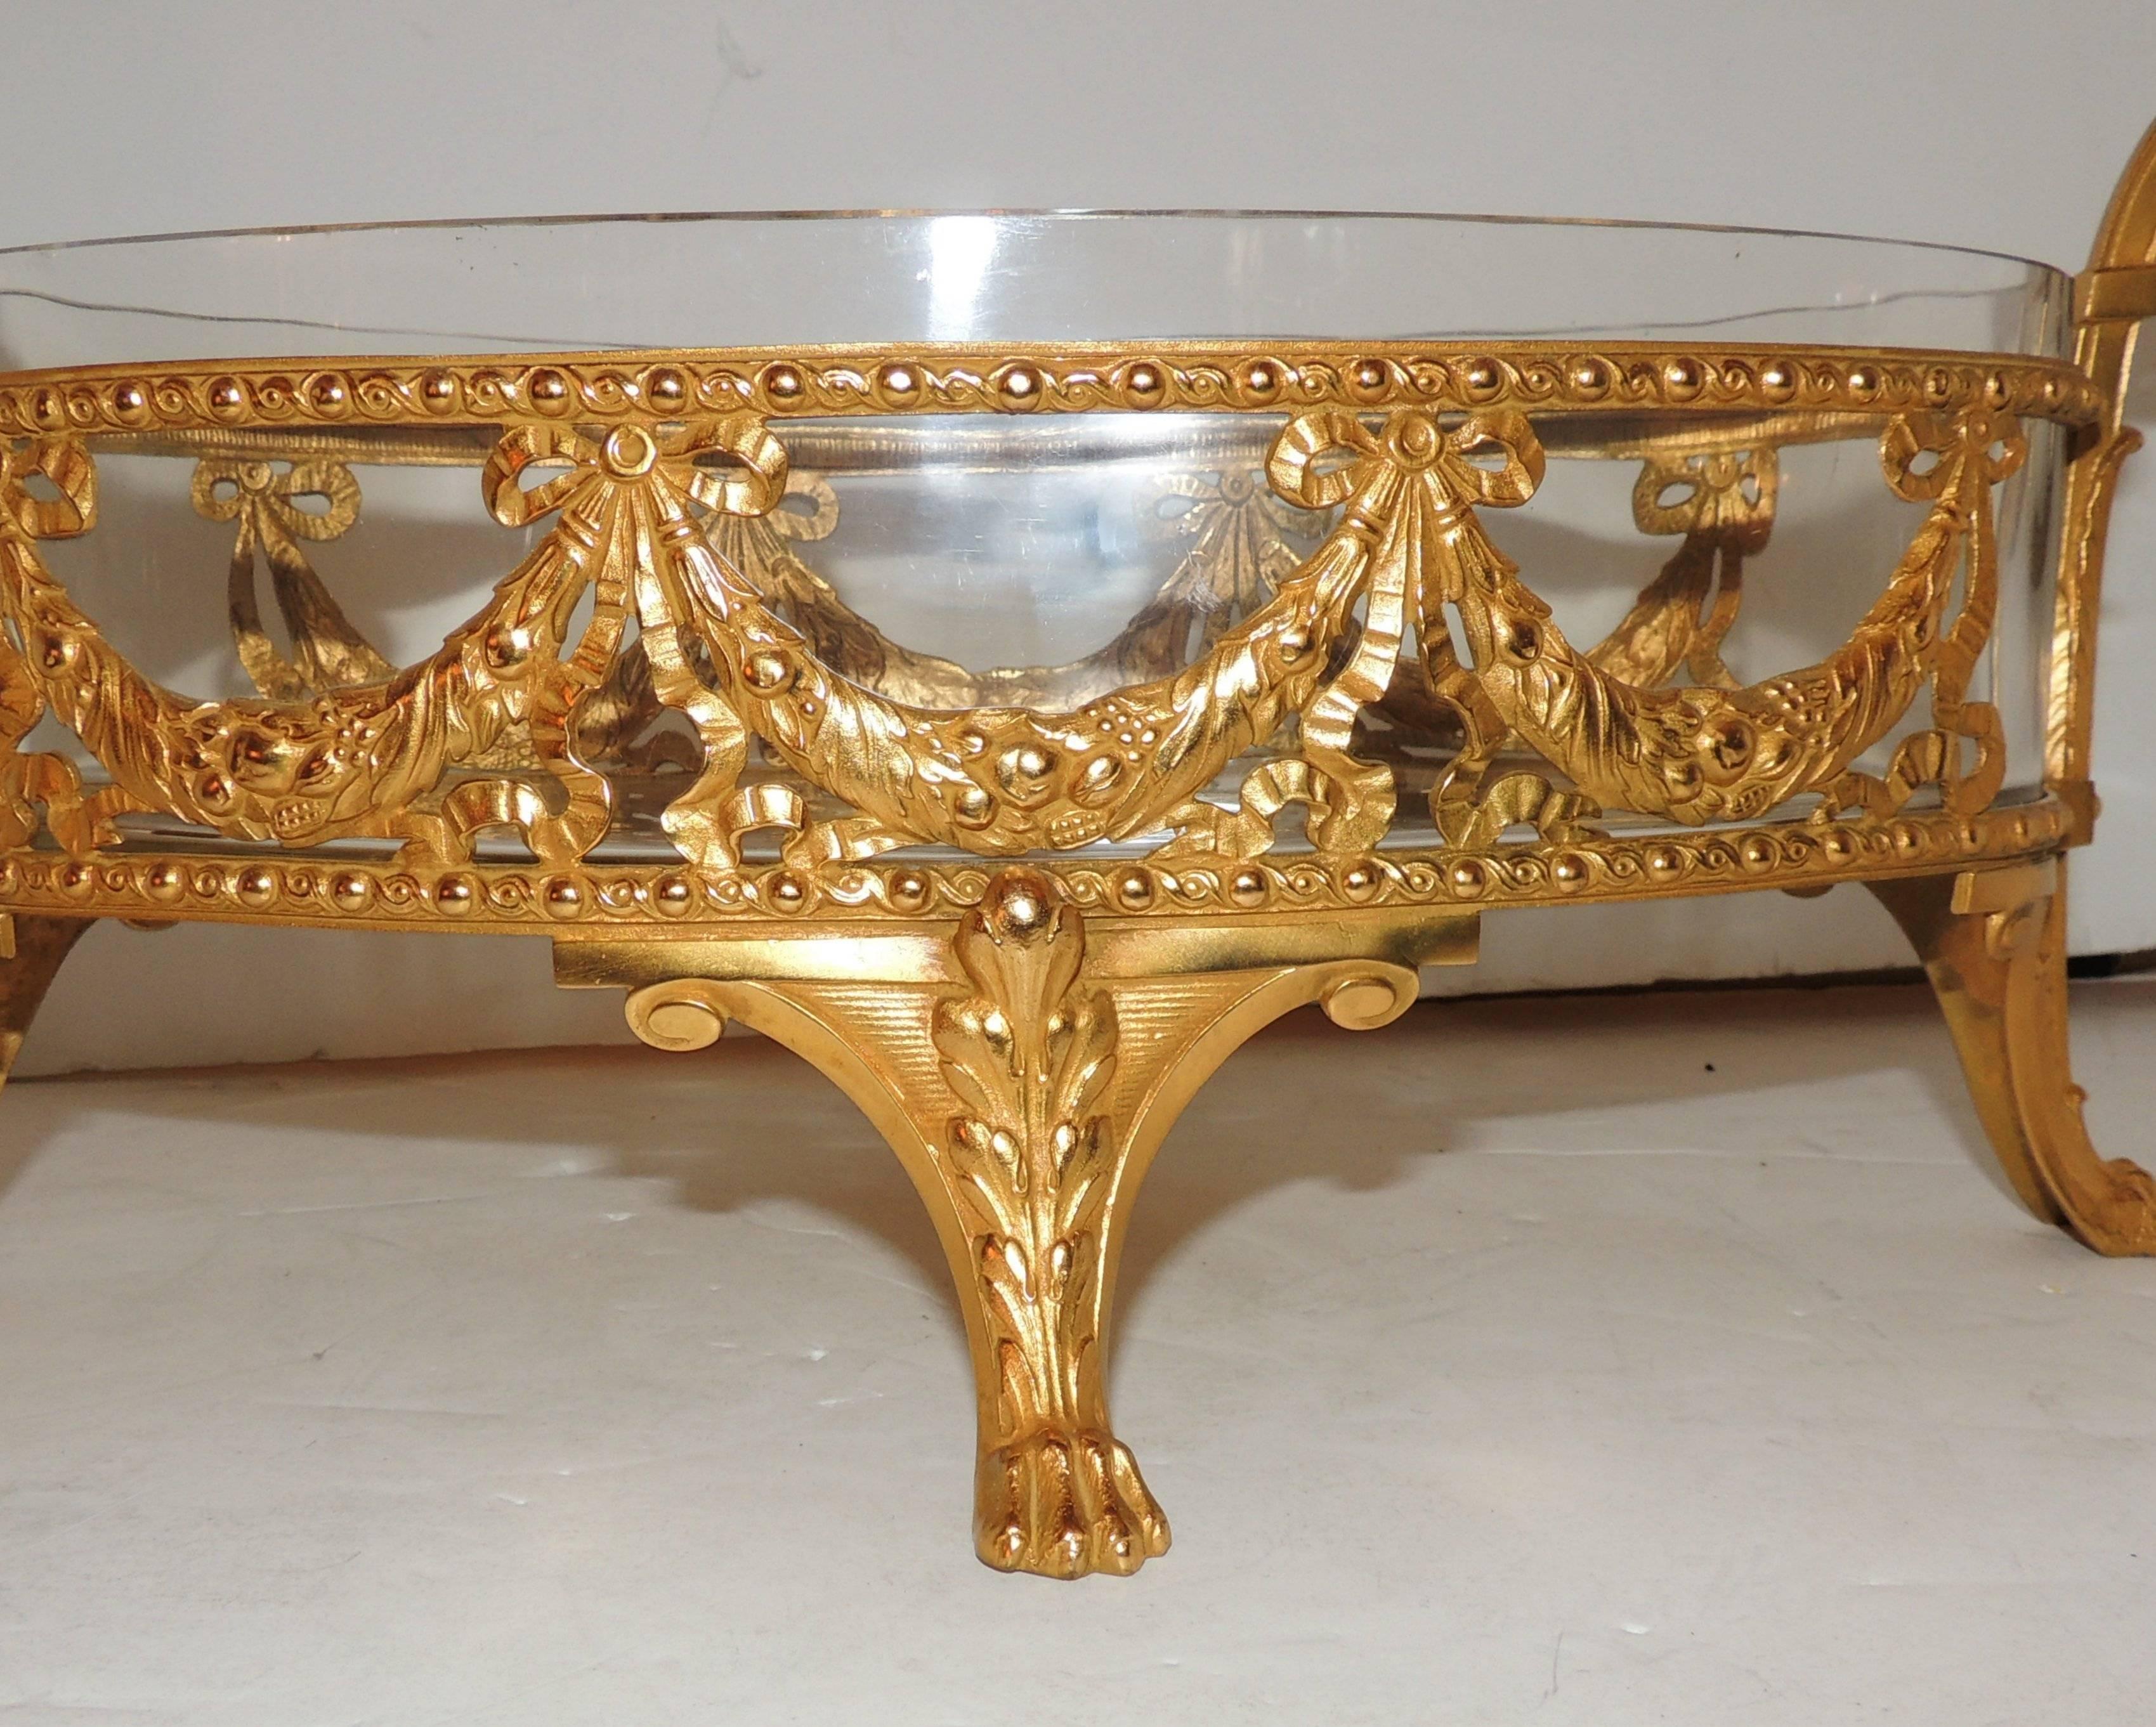 Doré Bronze Crystal Oval Bowl Centerpiece Ormolu Bows Filigree Swag Paw Feet In Good Condition For Sale In Roslyn, NY